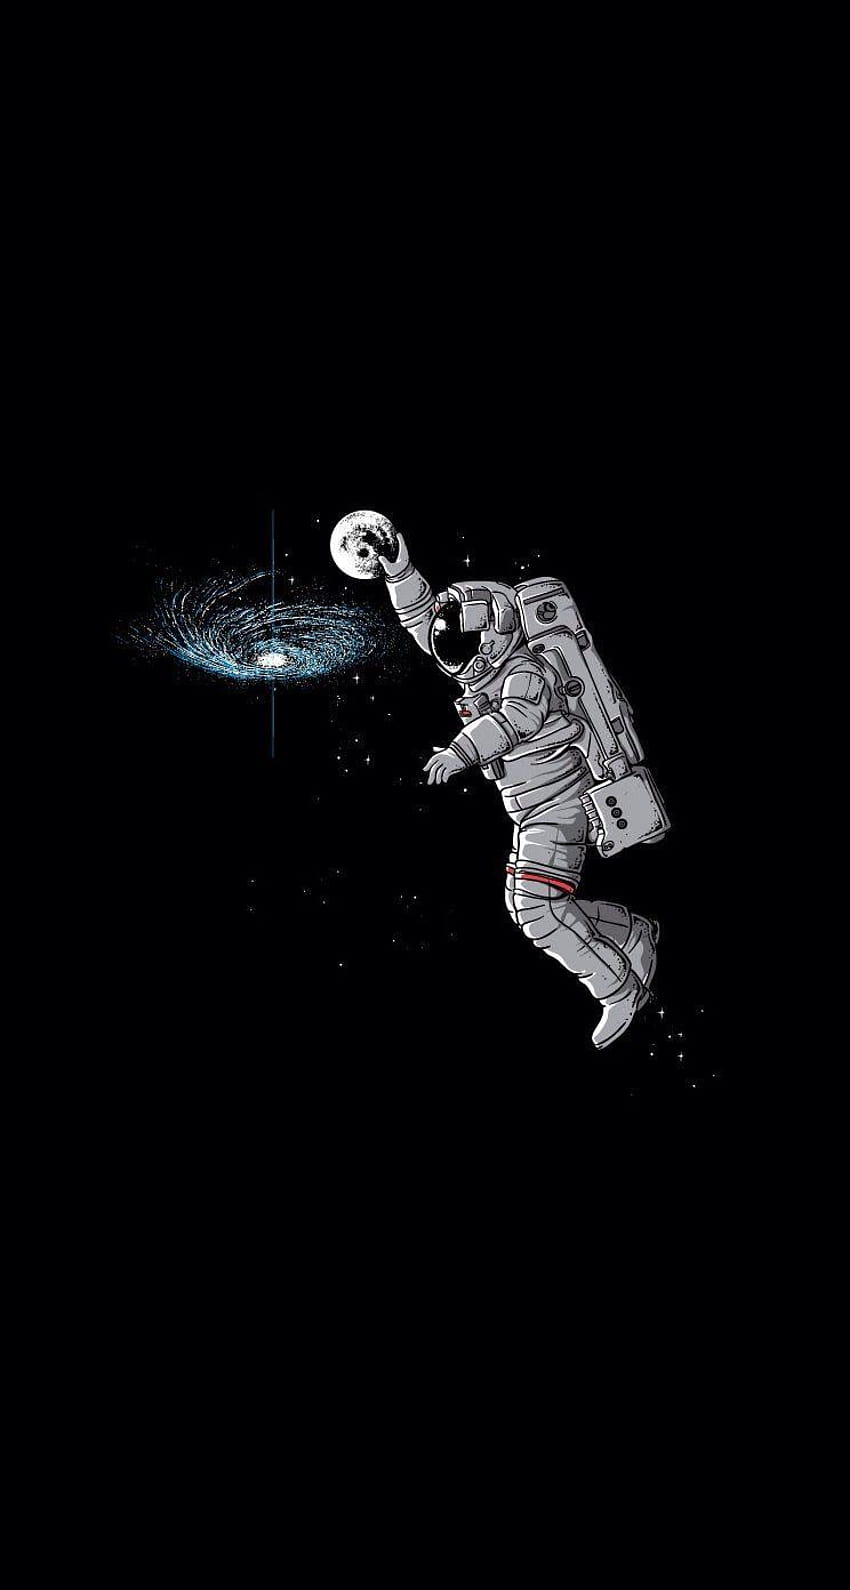 Dunk astronot, astronot wallpaper ponsel HD